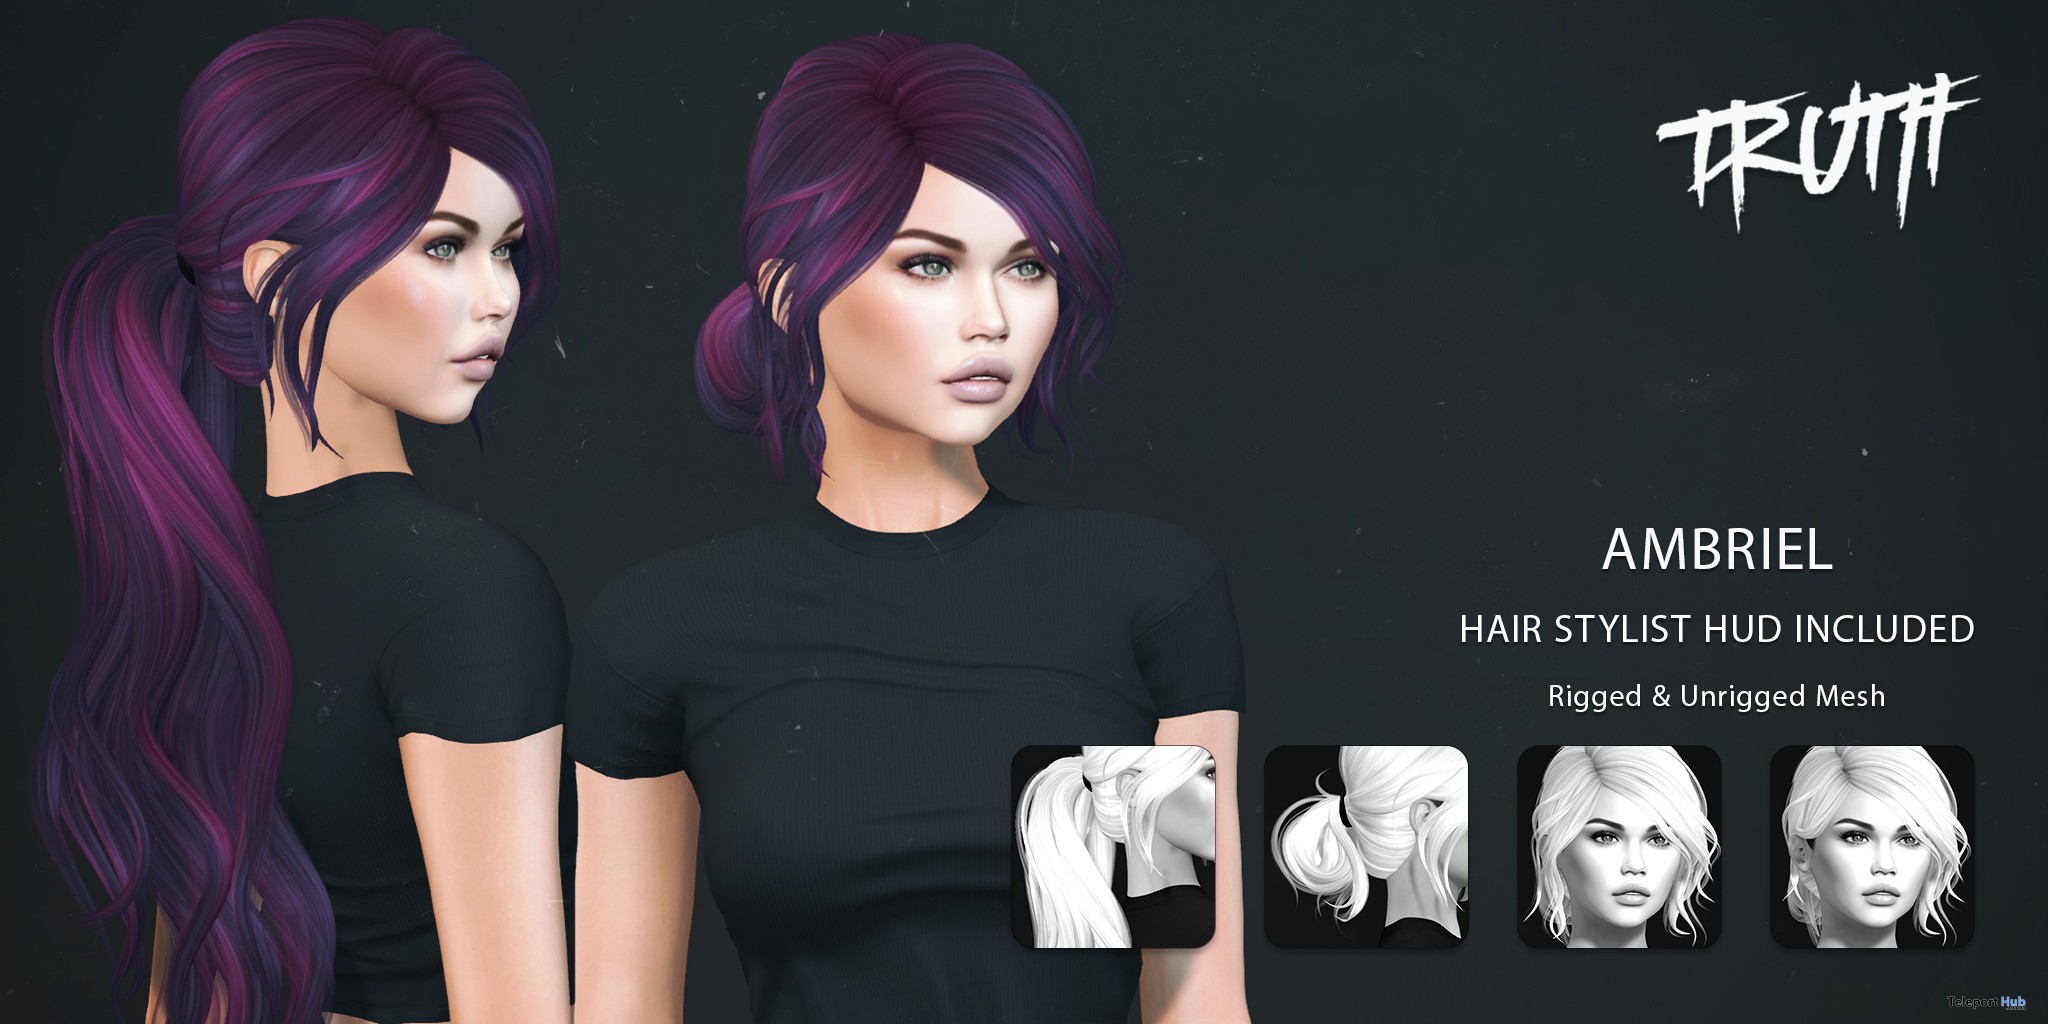 Ambriel Hair June 2017 VIP Group Gift by TRUTH HAIR - Teleport Hub - teleporthub.com